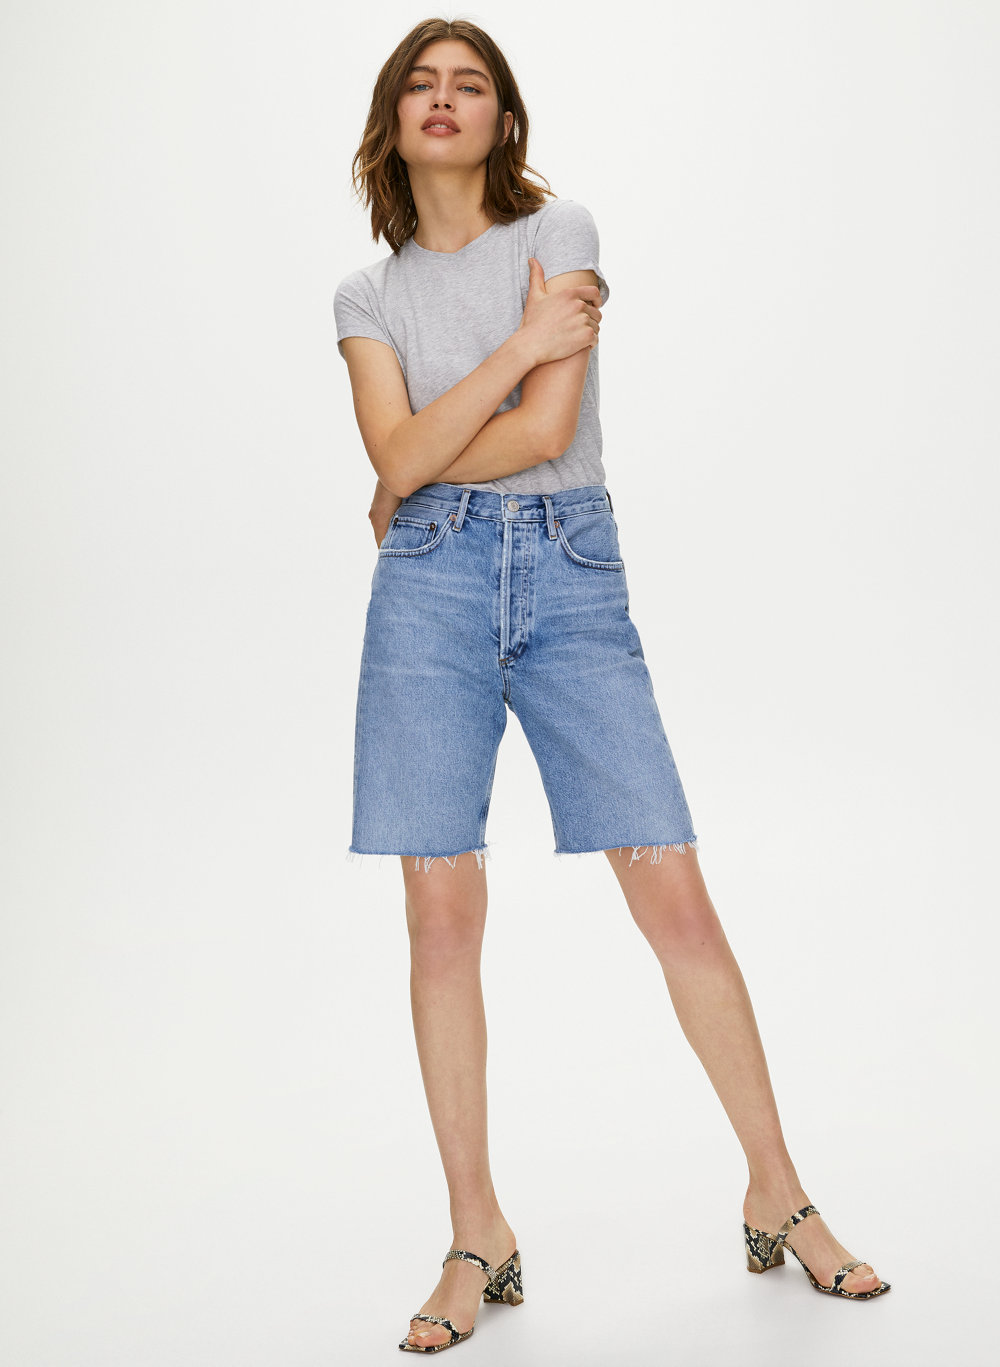 Agolde 90s Shorts Top Sellers, 58% OFF | www.emanagreen.com